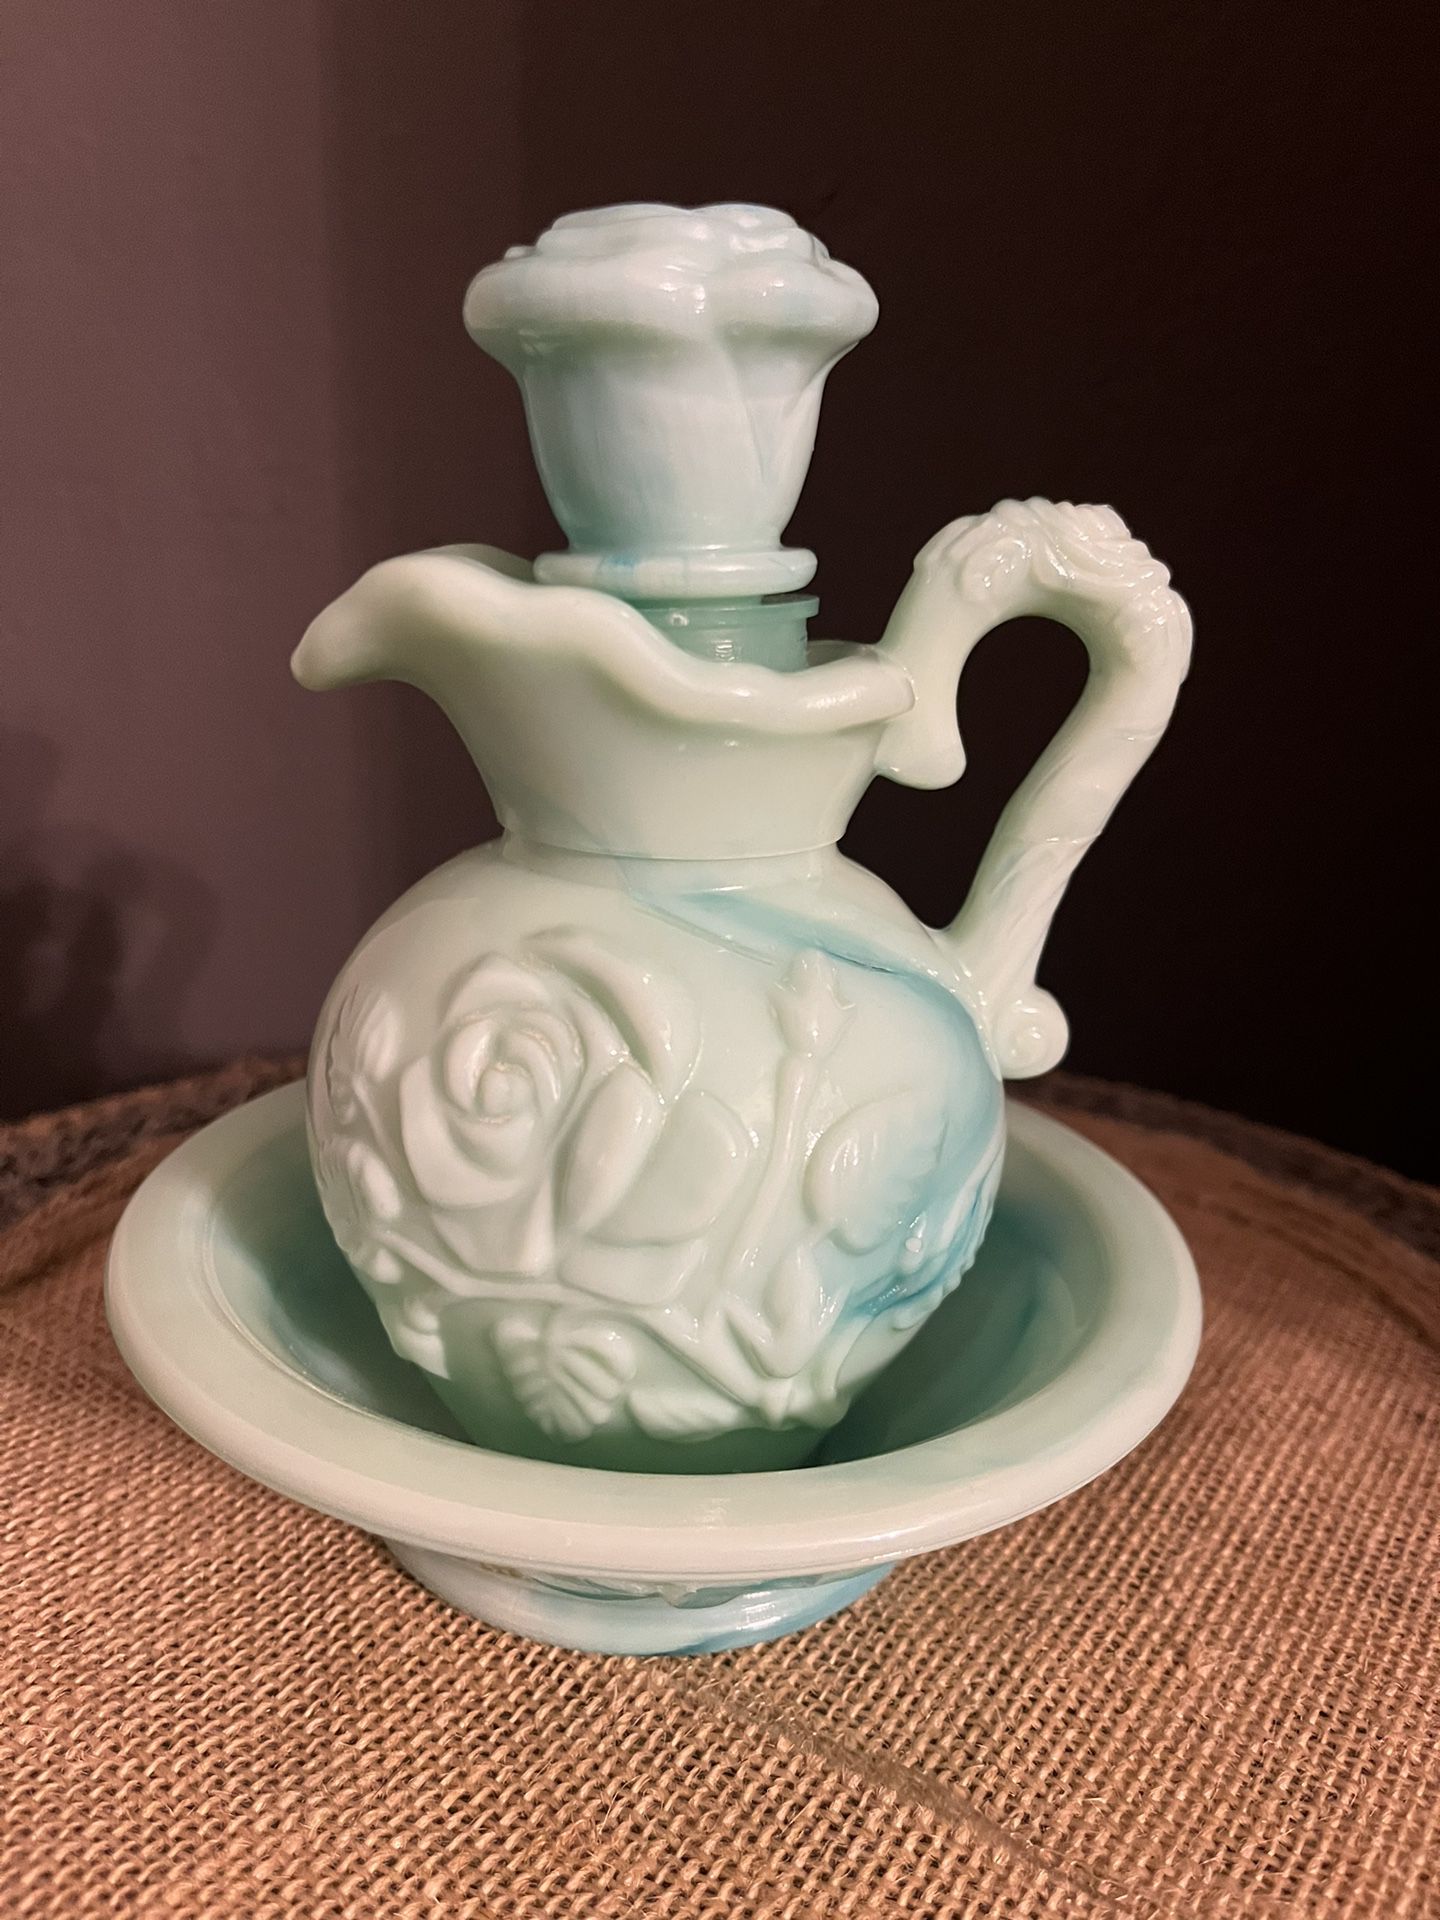 Vintage Avon Turquoise Green Milk Glass Pitcher and Bowl